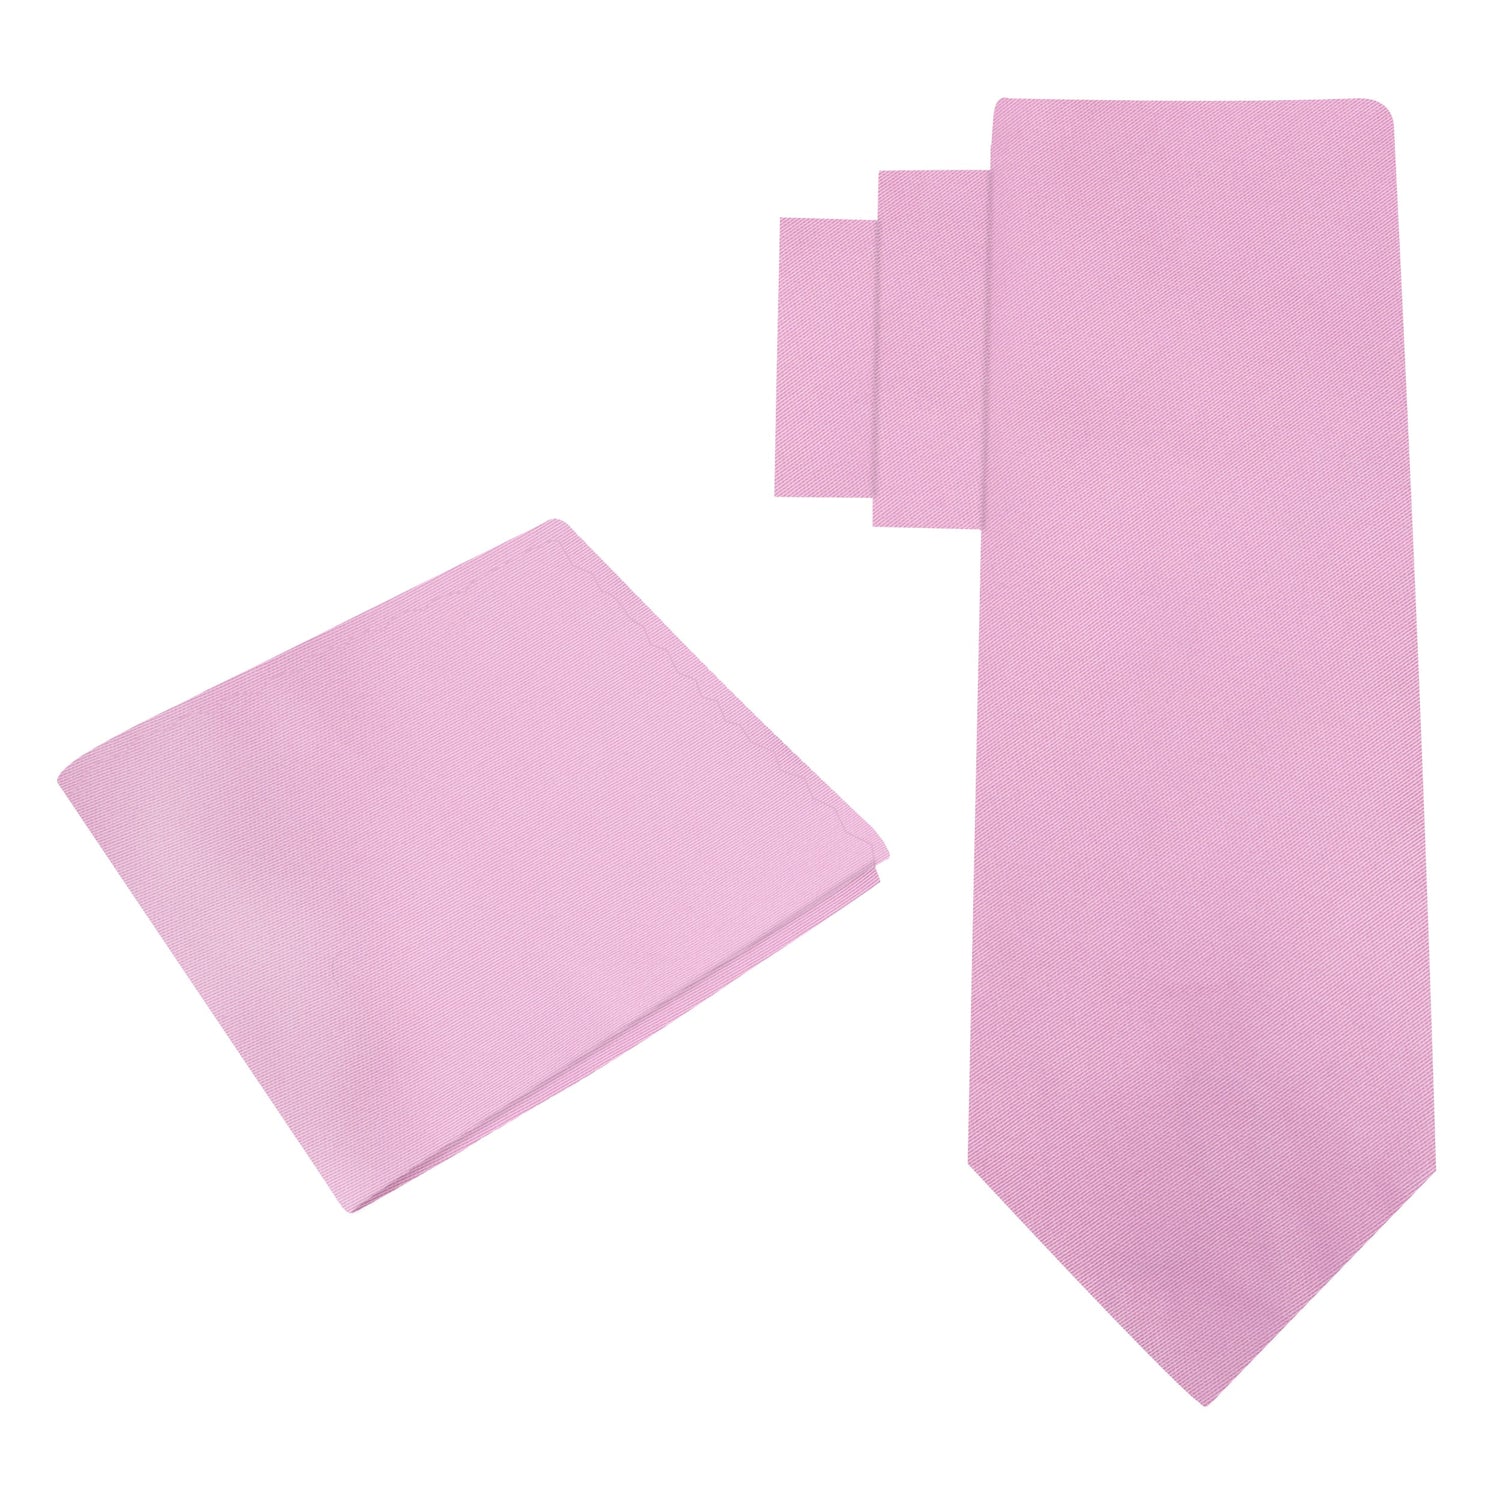 Alt View: Solid Glossy Light Orchid Pink Silk Necktie and Pocket Square